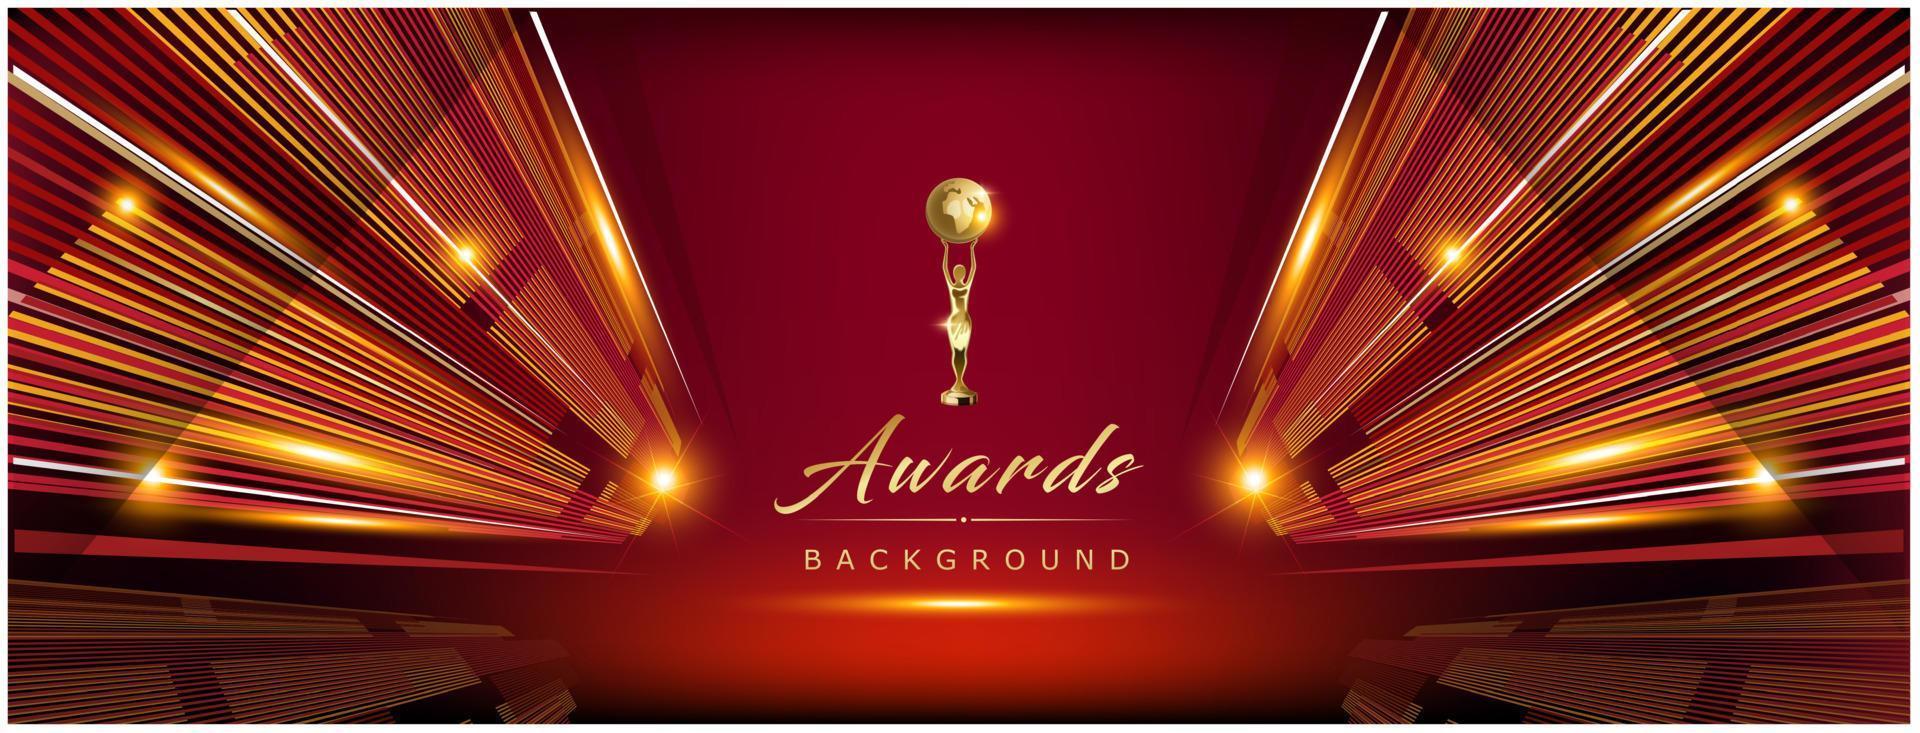 Red Maroon Golden Royal Awards Background Graphics Lines Stripes Breaking News Elegant Shine Modern Blended Template Luxury Premium Corporate Abstract Design Template Banner Certificate Dynamic Shape vector